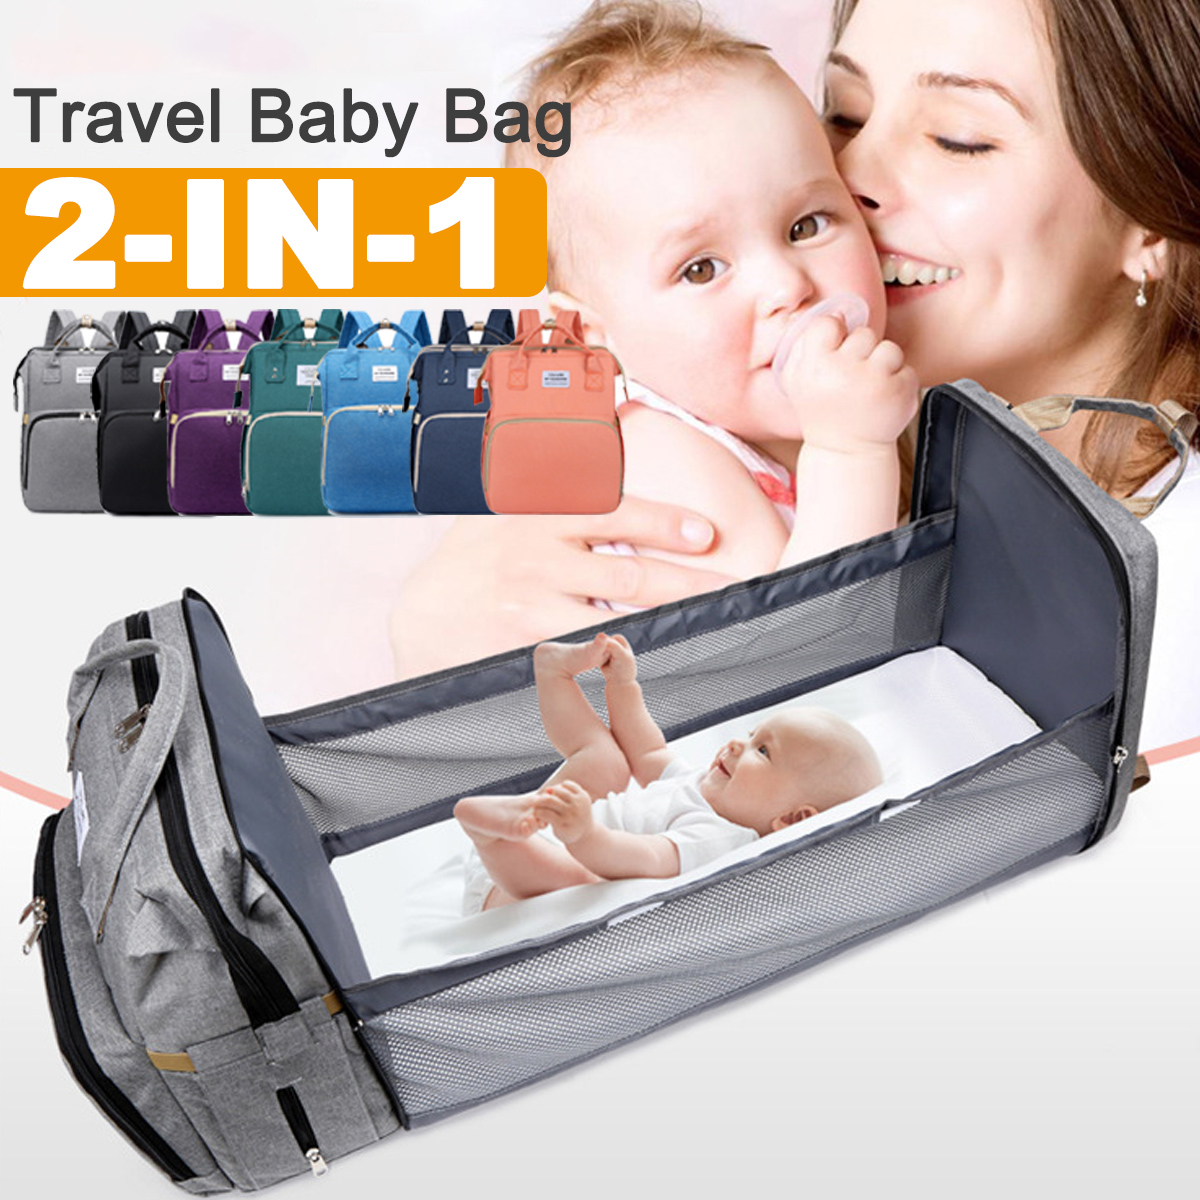 2-IN-1-Foldable-Diaper-Bag-Large-Capacity-Baby-Crib-Backpack-Nappy-Mummy-Bags-For-Mom-Outdoors-Trave-1826517-1